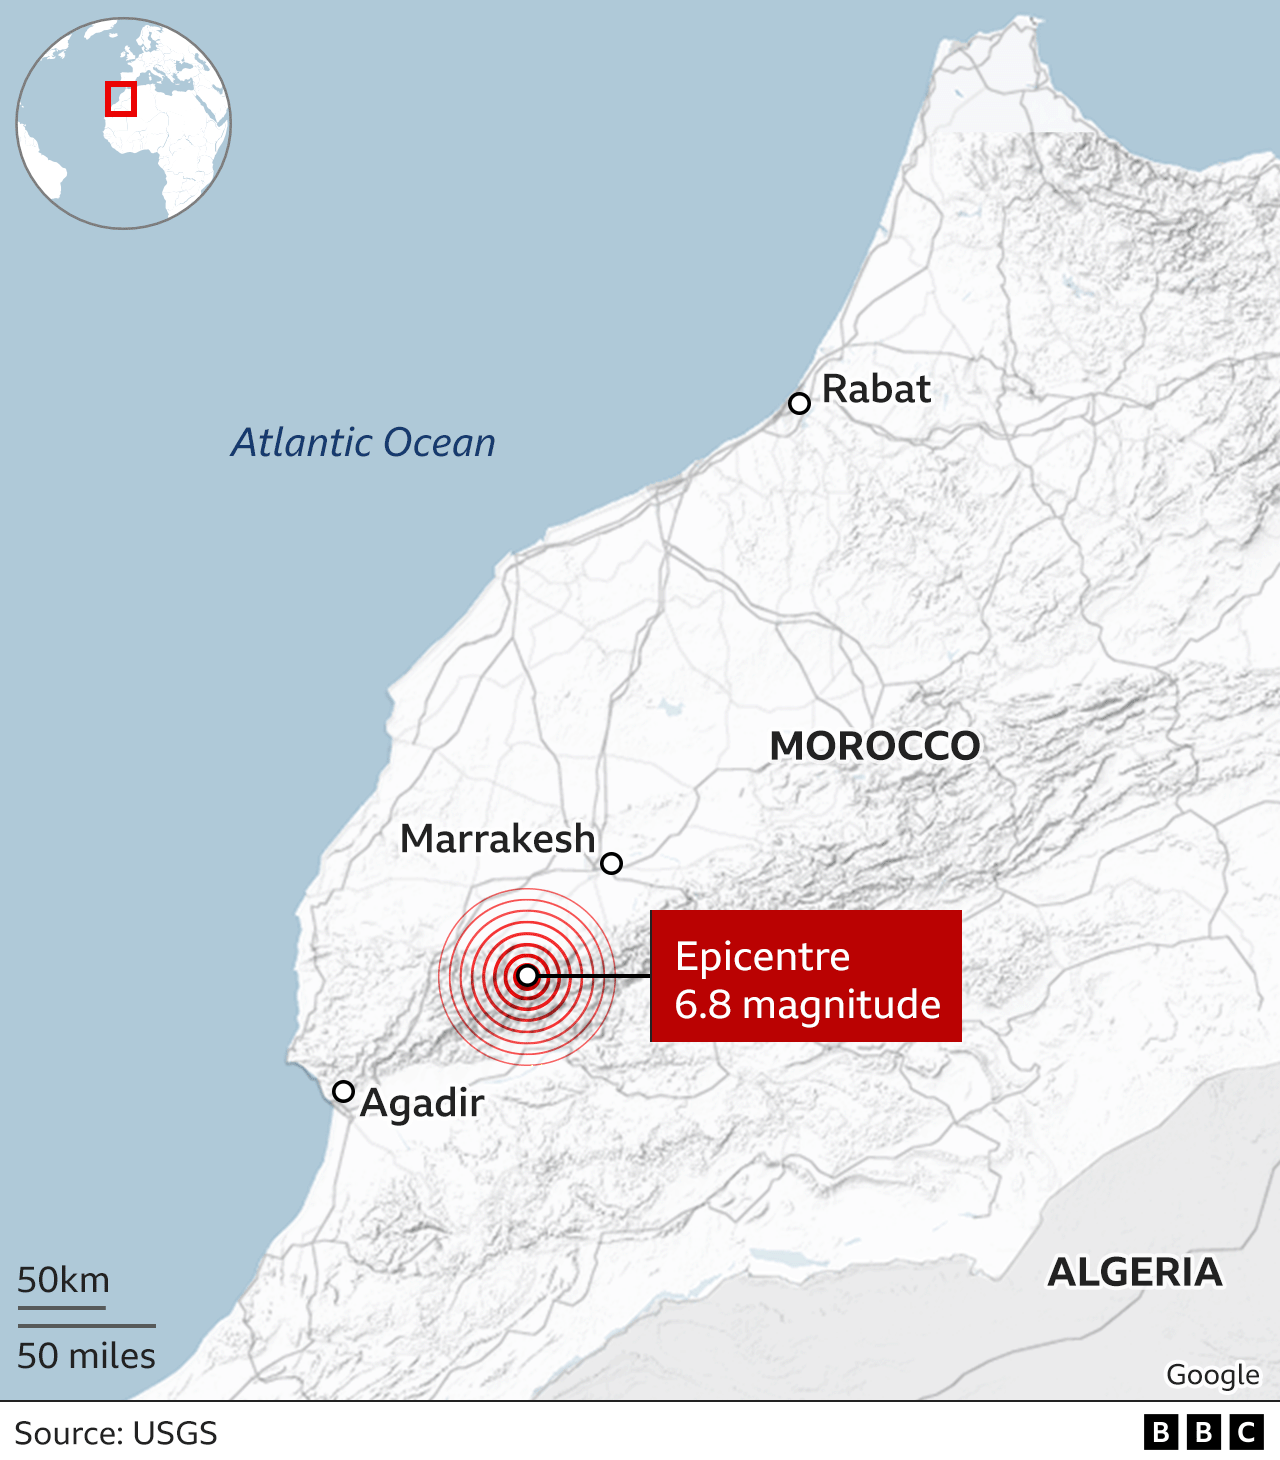 Map of Morocco showing epicentre of earthquake, in a remote area between Marrakesh and Agadir